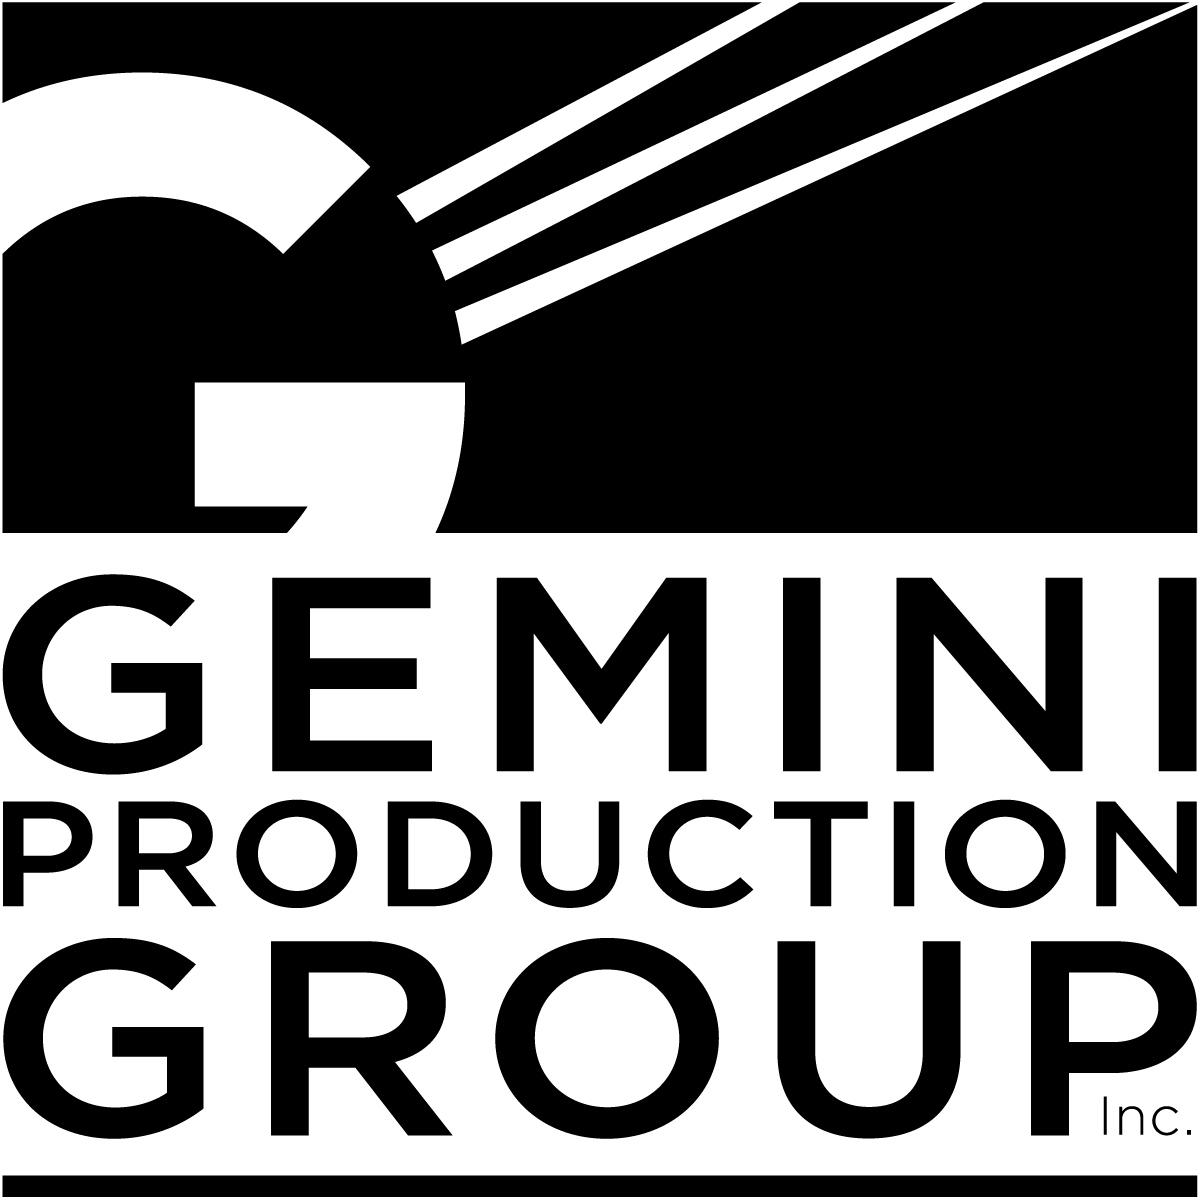 Gemini Production Group, Inc profile on Qualified.One